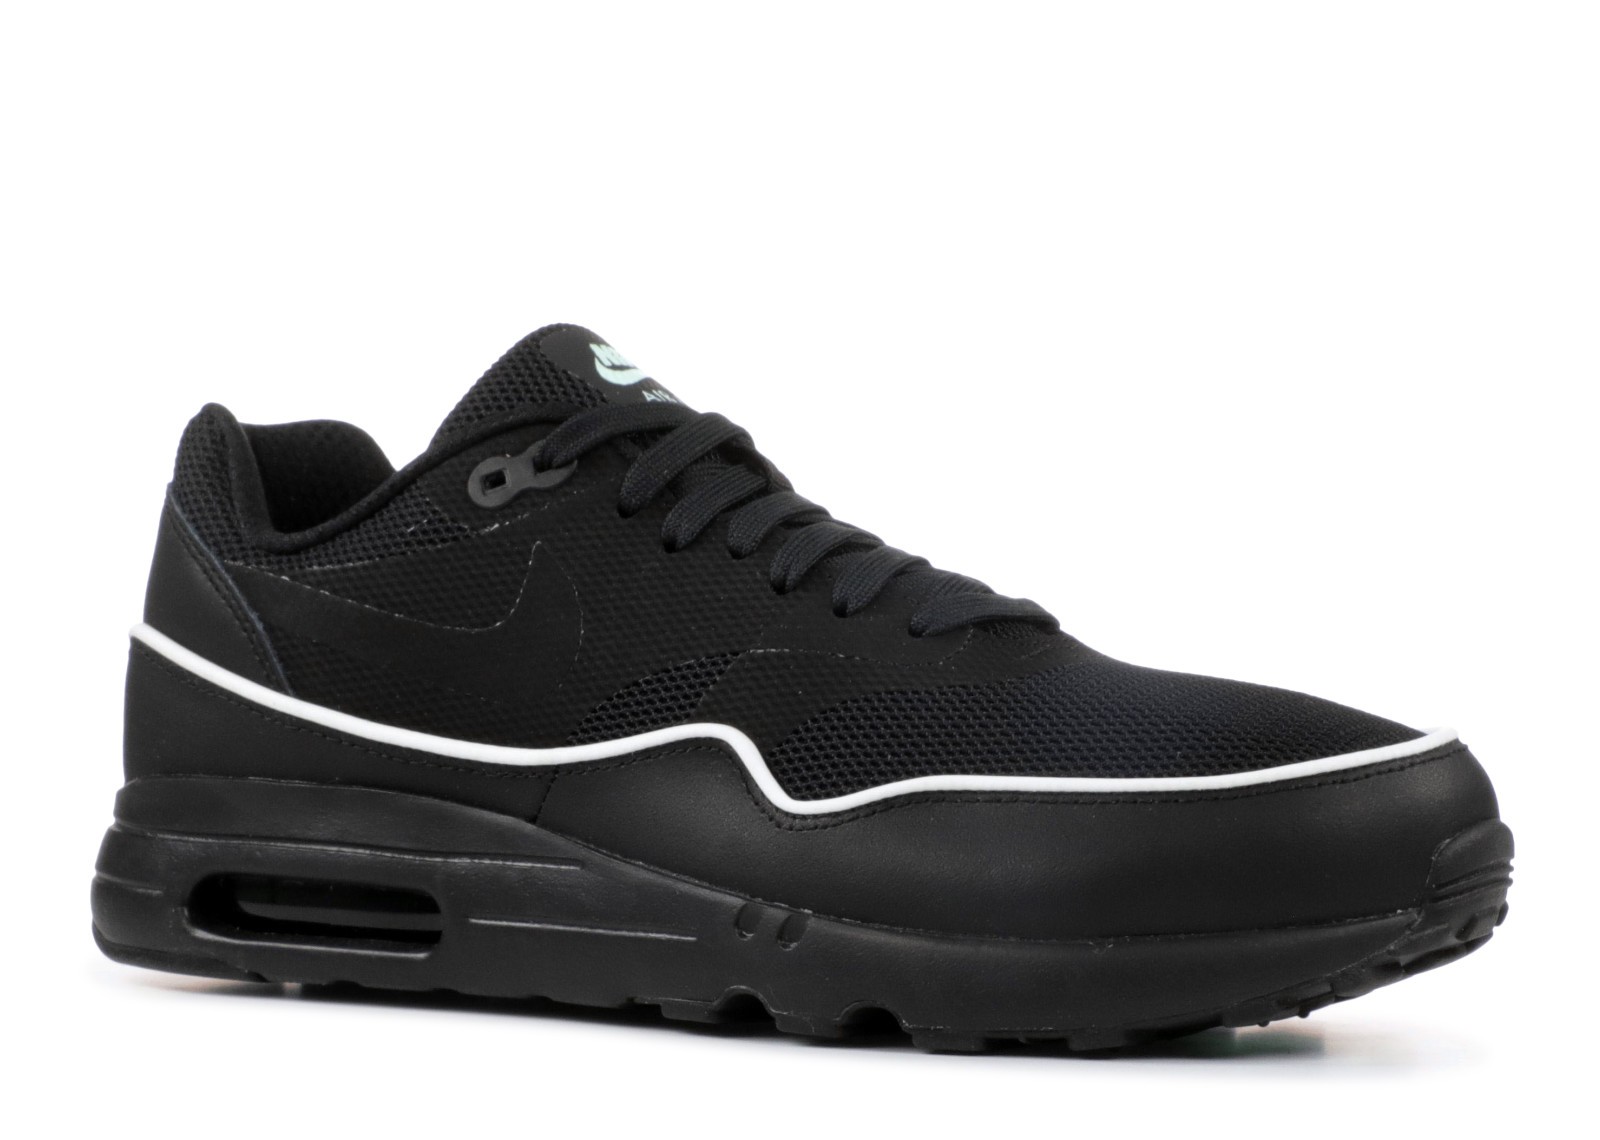 006 - Nike Air Max 1 Ultra 2.0 Mint Foam Black 875679 - Nike Chinese Year 2019 Collection MultiscaleconsultingShops